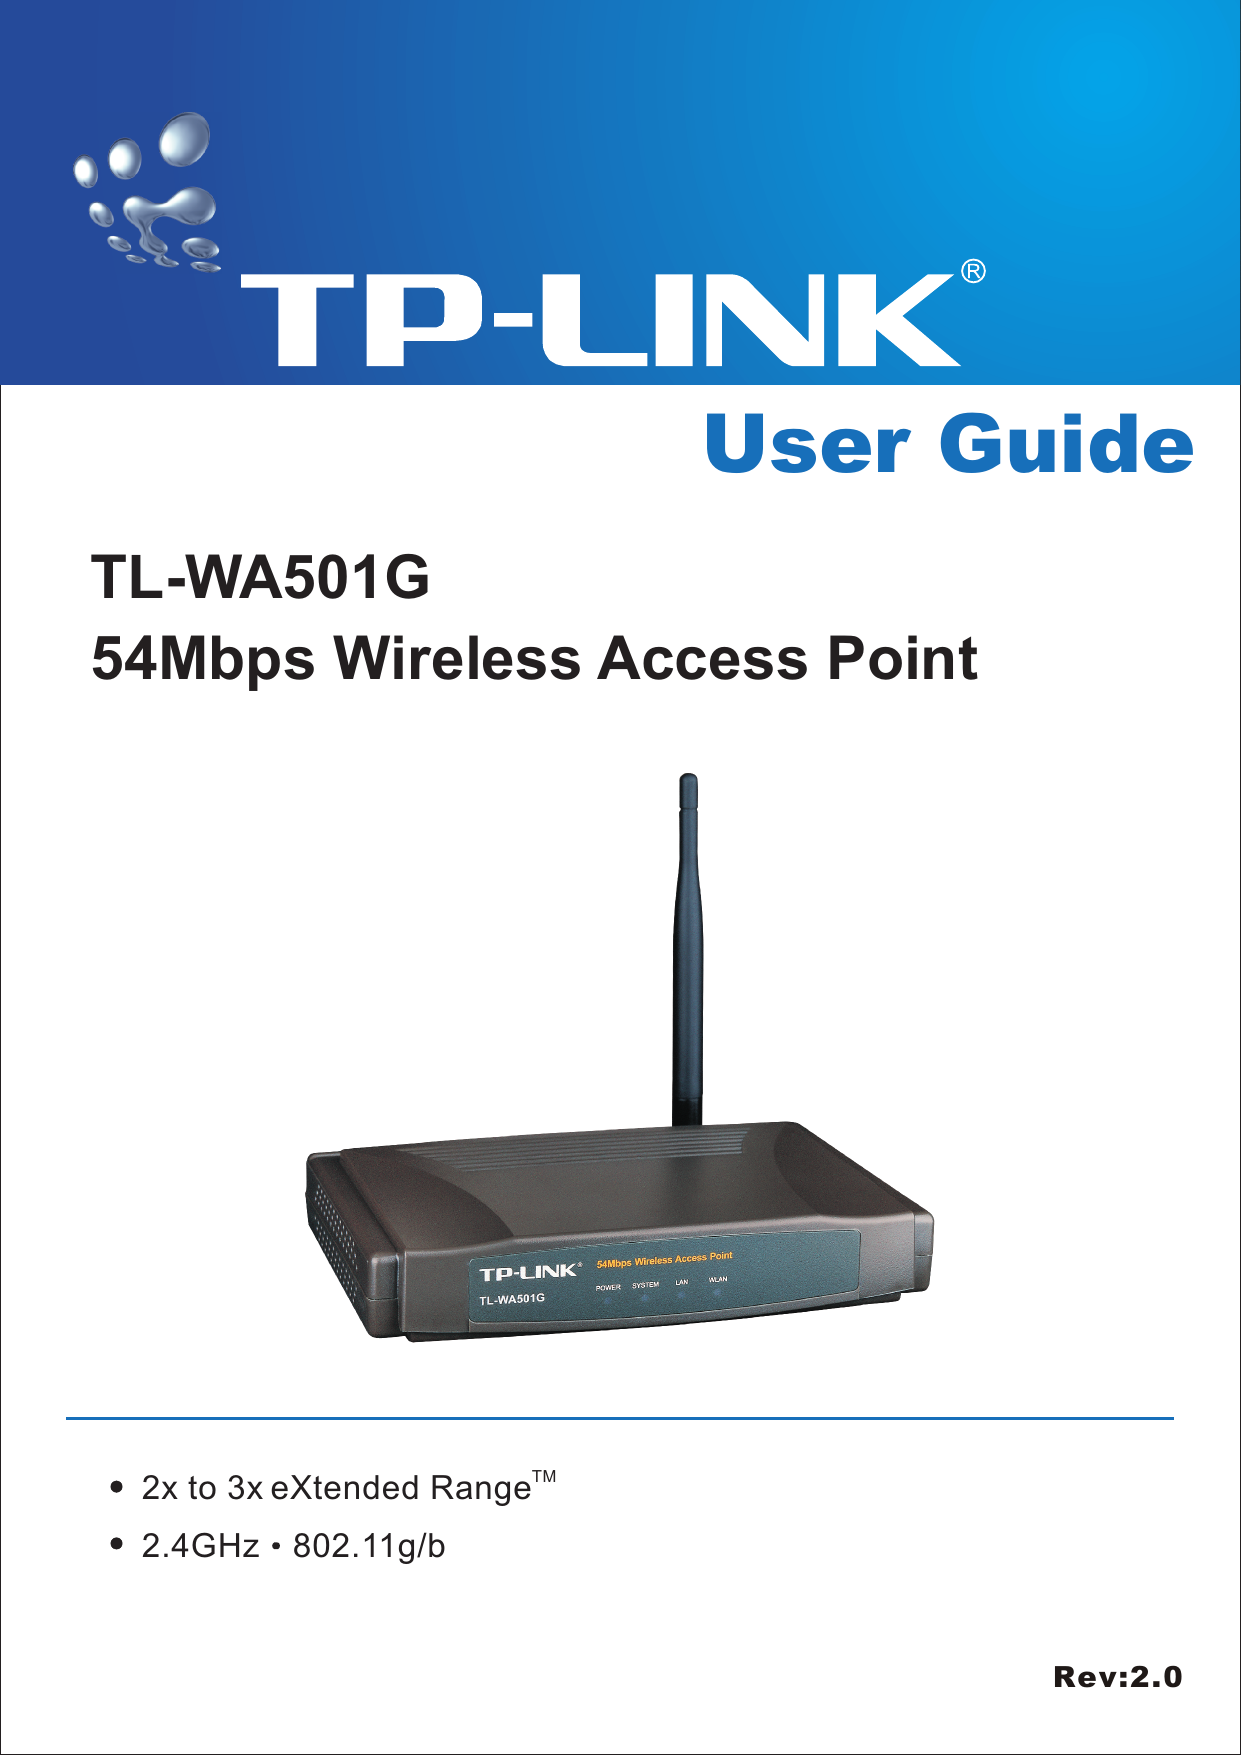 User GuideTL-WA501G54Mbps Wireless Access PointTM2x to 3x eXtended Range2.4GHz 802.11g/bRev:2.0